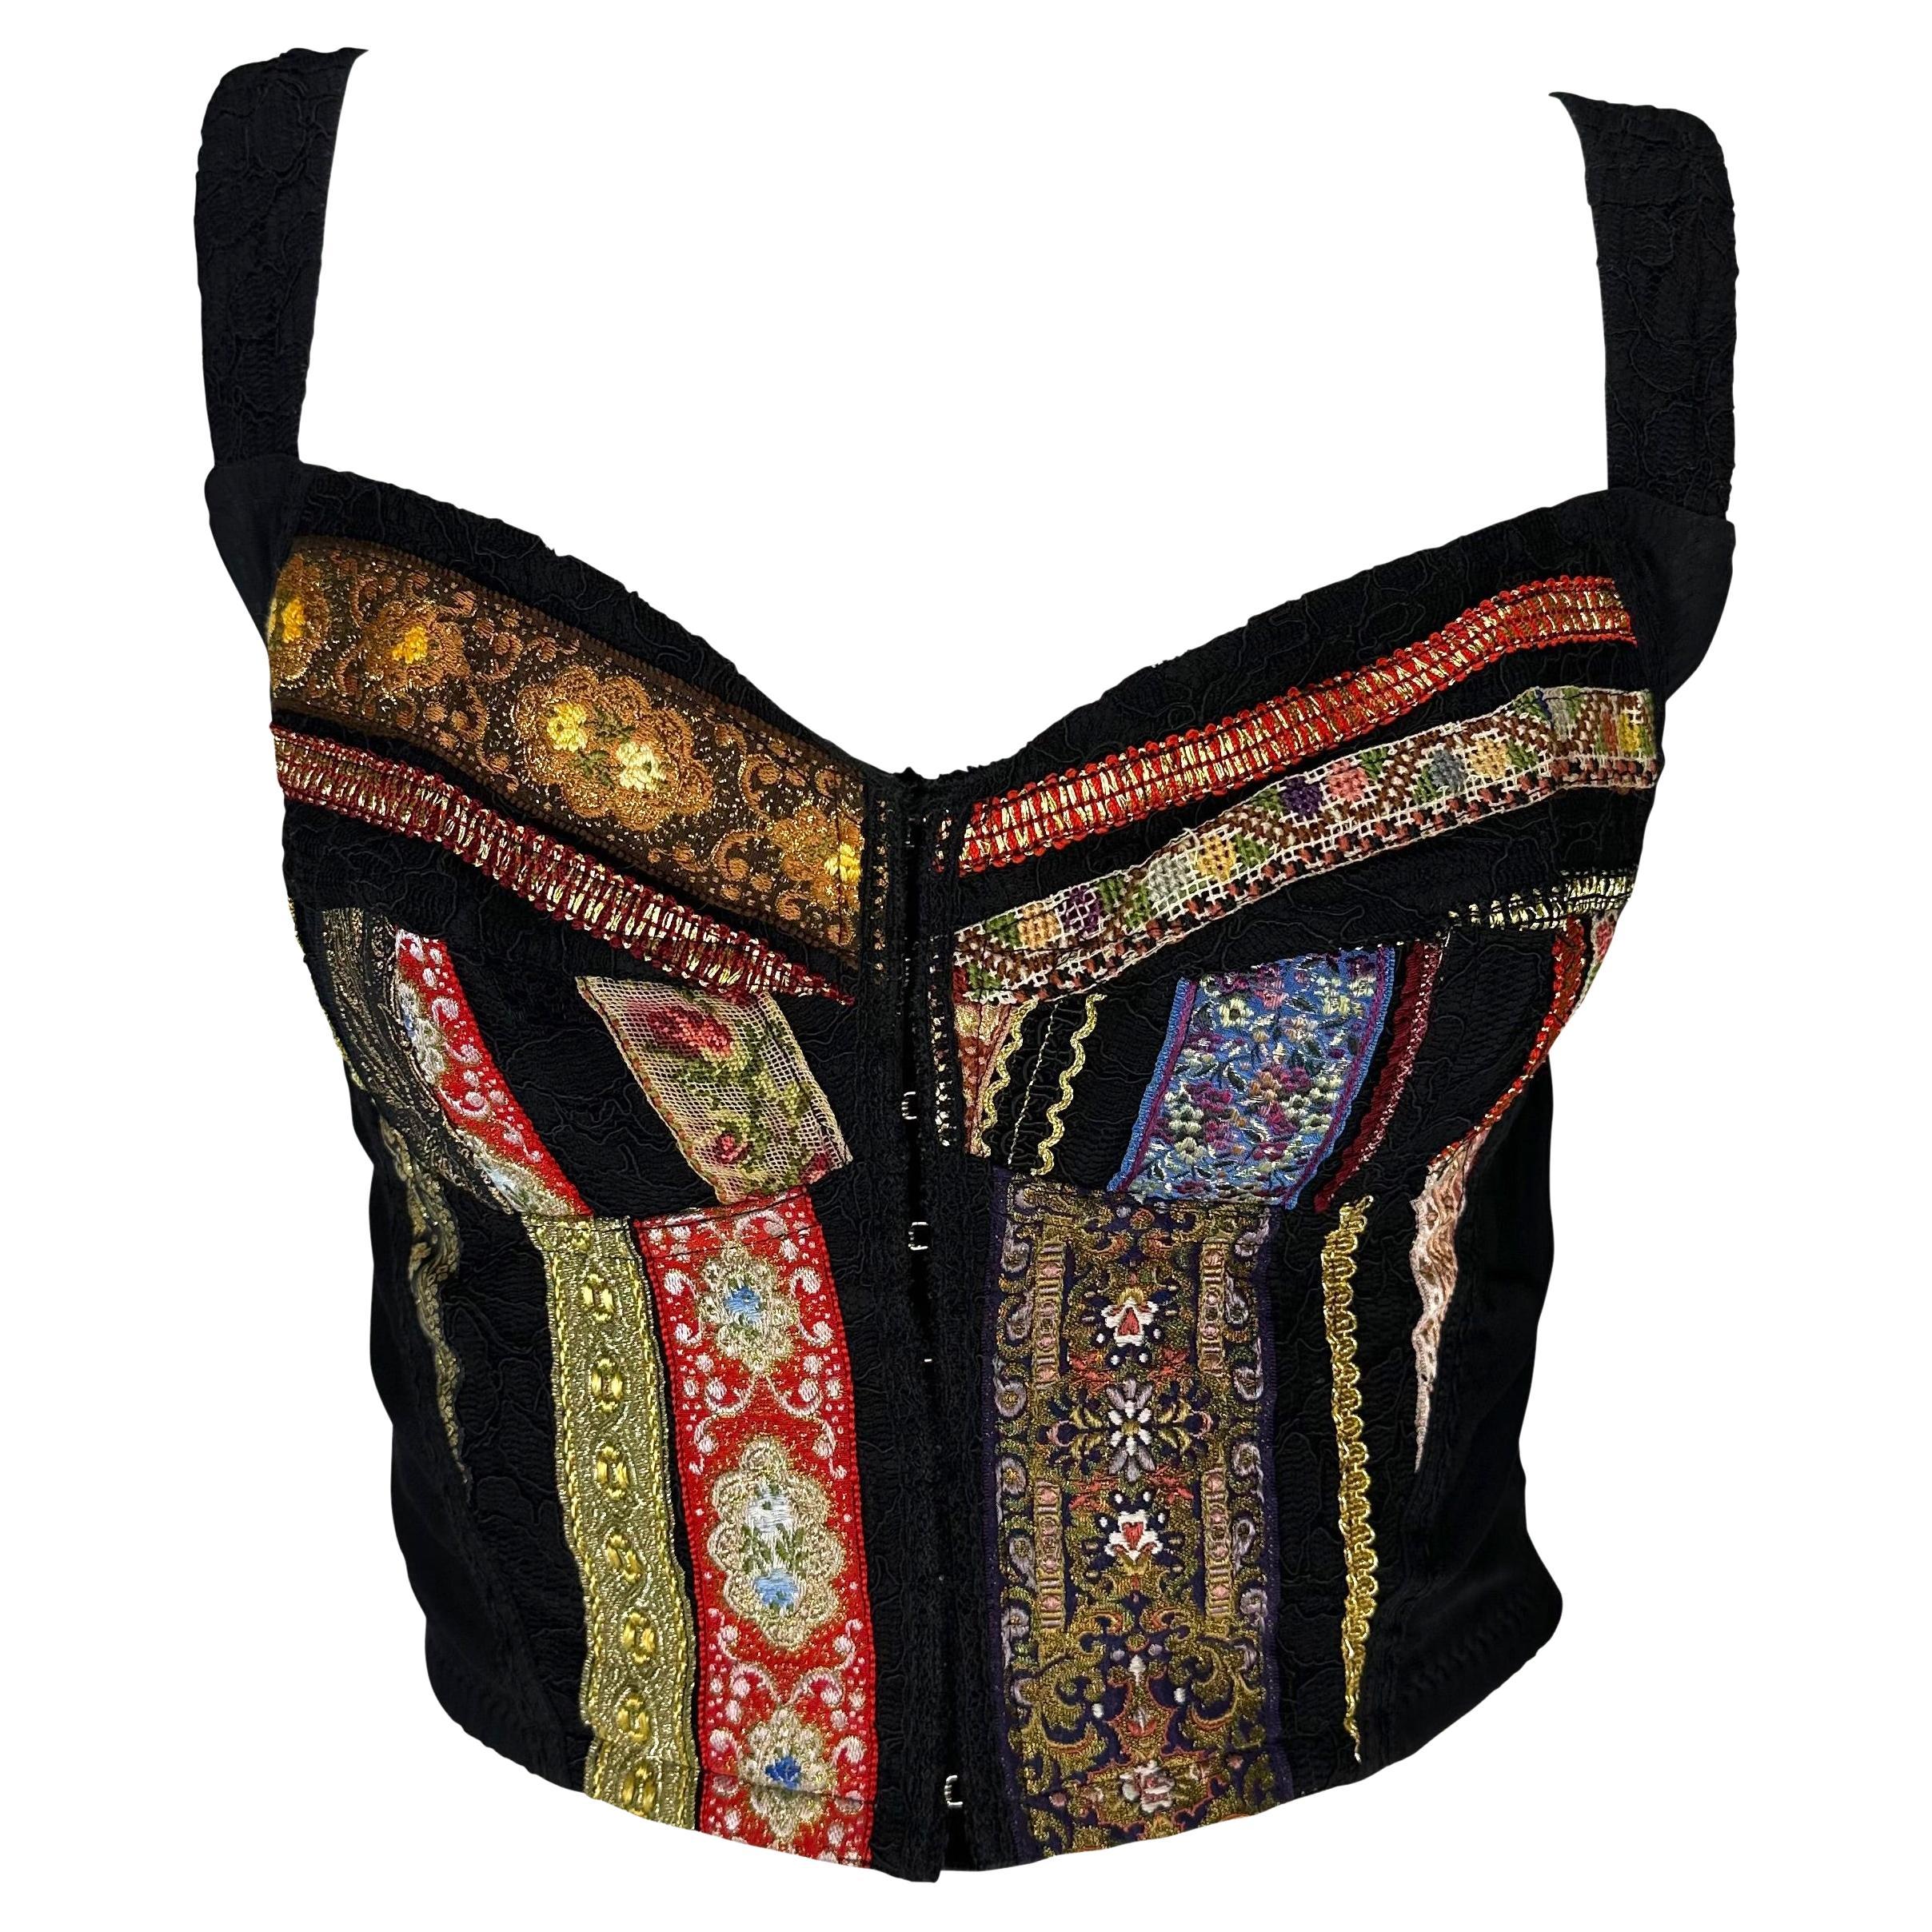 S/S 1993 Dolce & Gabbana Runway Metallic Ribbon Lace Patchwork Bustier Crop Top For Sale